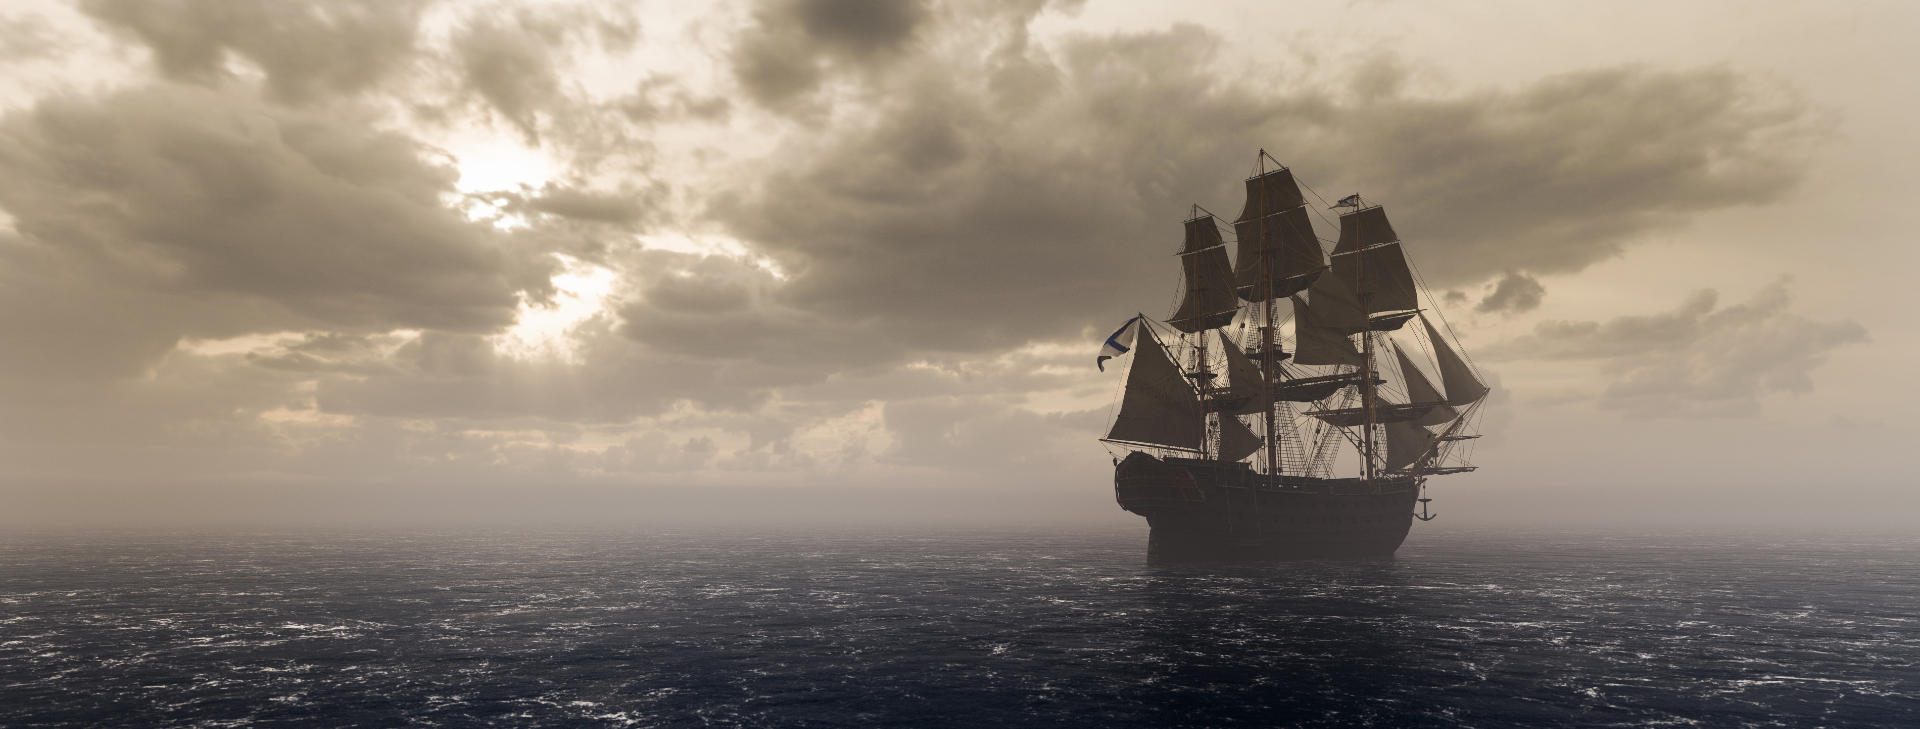 Resilient ship sailing through a stormy sea, symbolizing overcoming challenges.